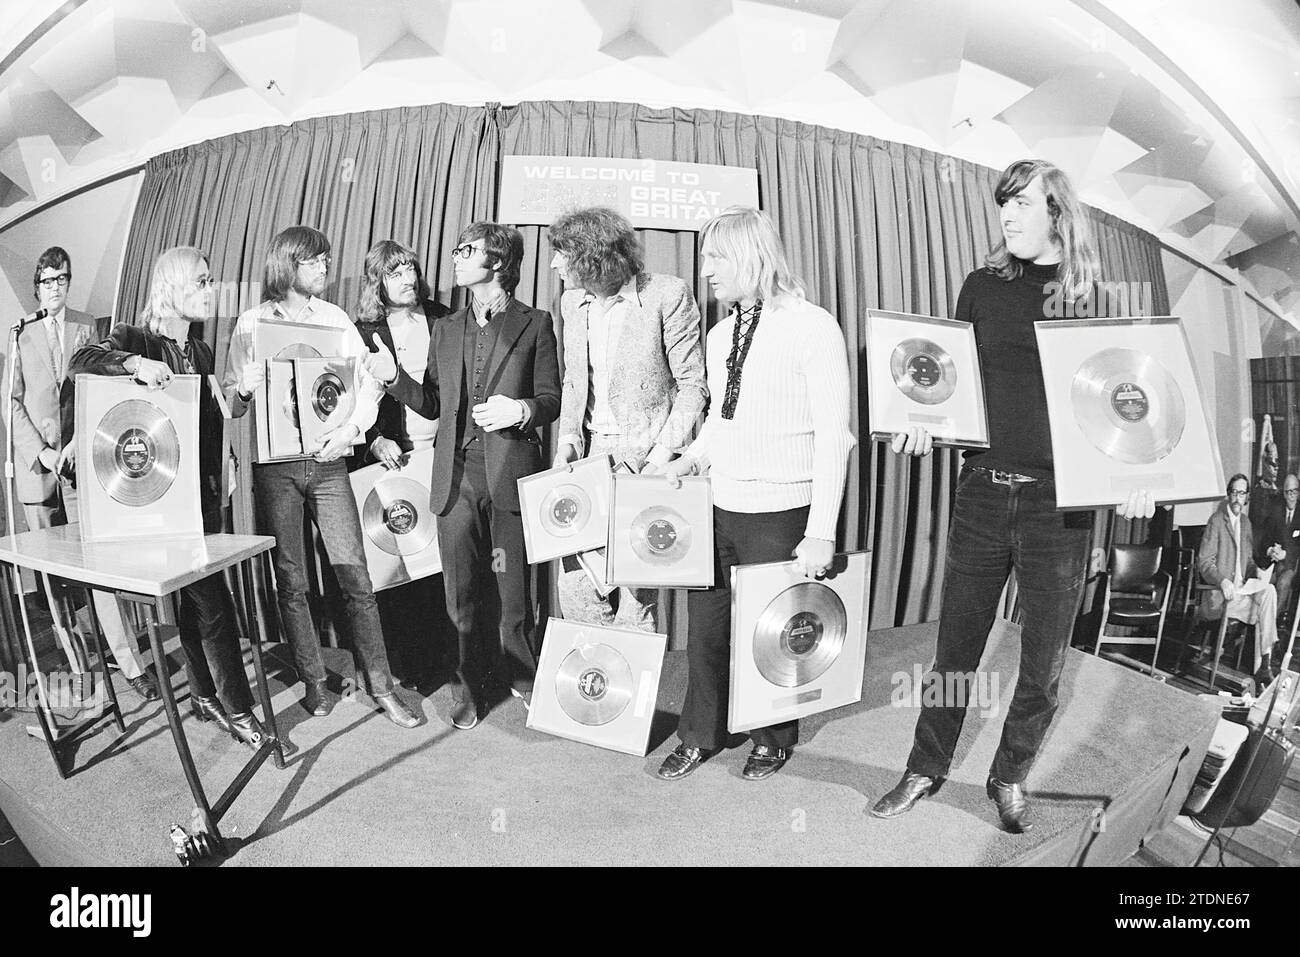 Presentation of three gold records to The Cats and the His Masters Voice ring to Johnny Jordaan, Tante Leen and conductor Harry de Groot in the Mount Royal hotel in London, by Cliff Richard on behalf of record company EMI, Music, Londen, Oxford Street, Verenigd Koninkrijk, 13-10-1970, Whizgle News from the Past, Tailored for the Future. Explore historical narratives, Dutch The Netherlands agency image with a modern perspective Stock Photo